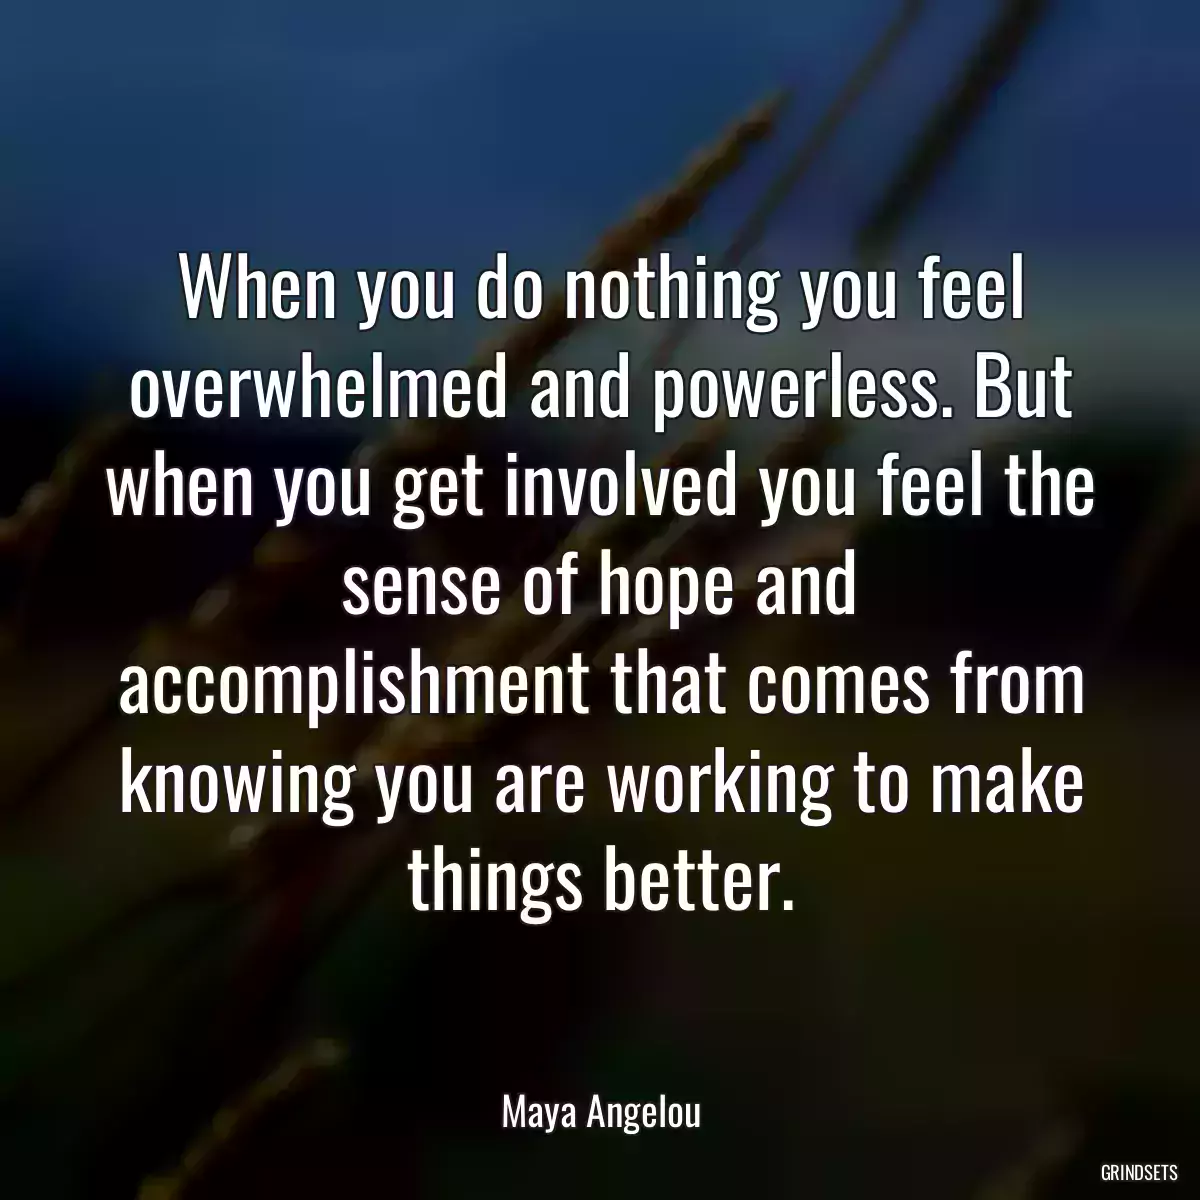 When you do nothing you feel overwhelmed and powerless. But when you get involved you feel the sense of hope and accomplishment that comes from knowing you are working to make things better.